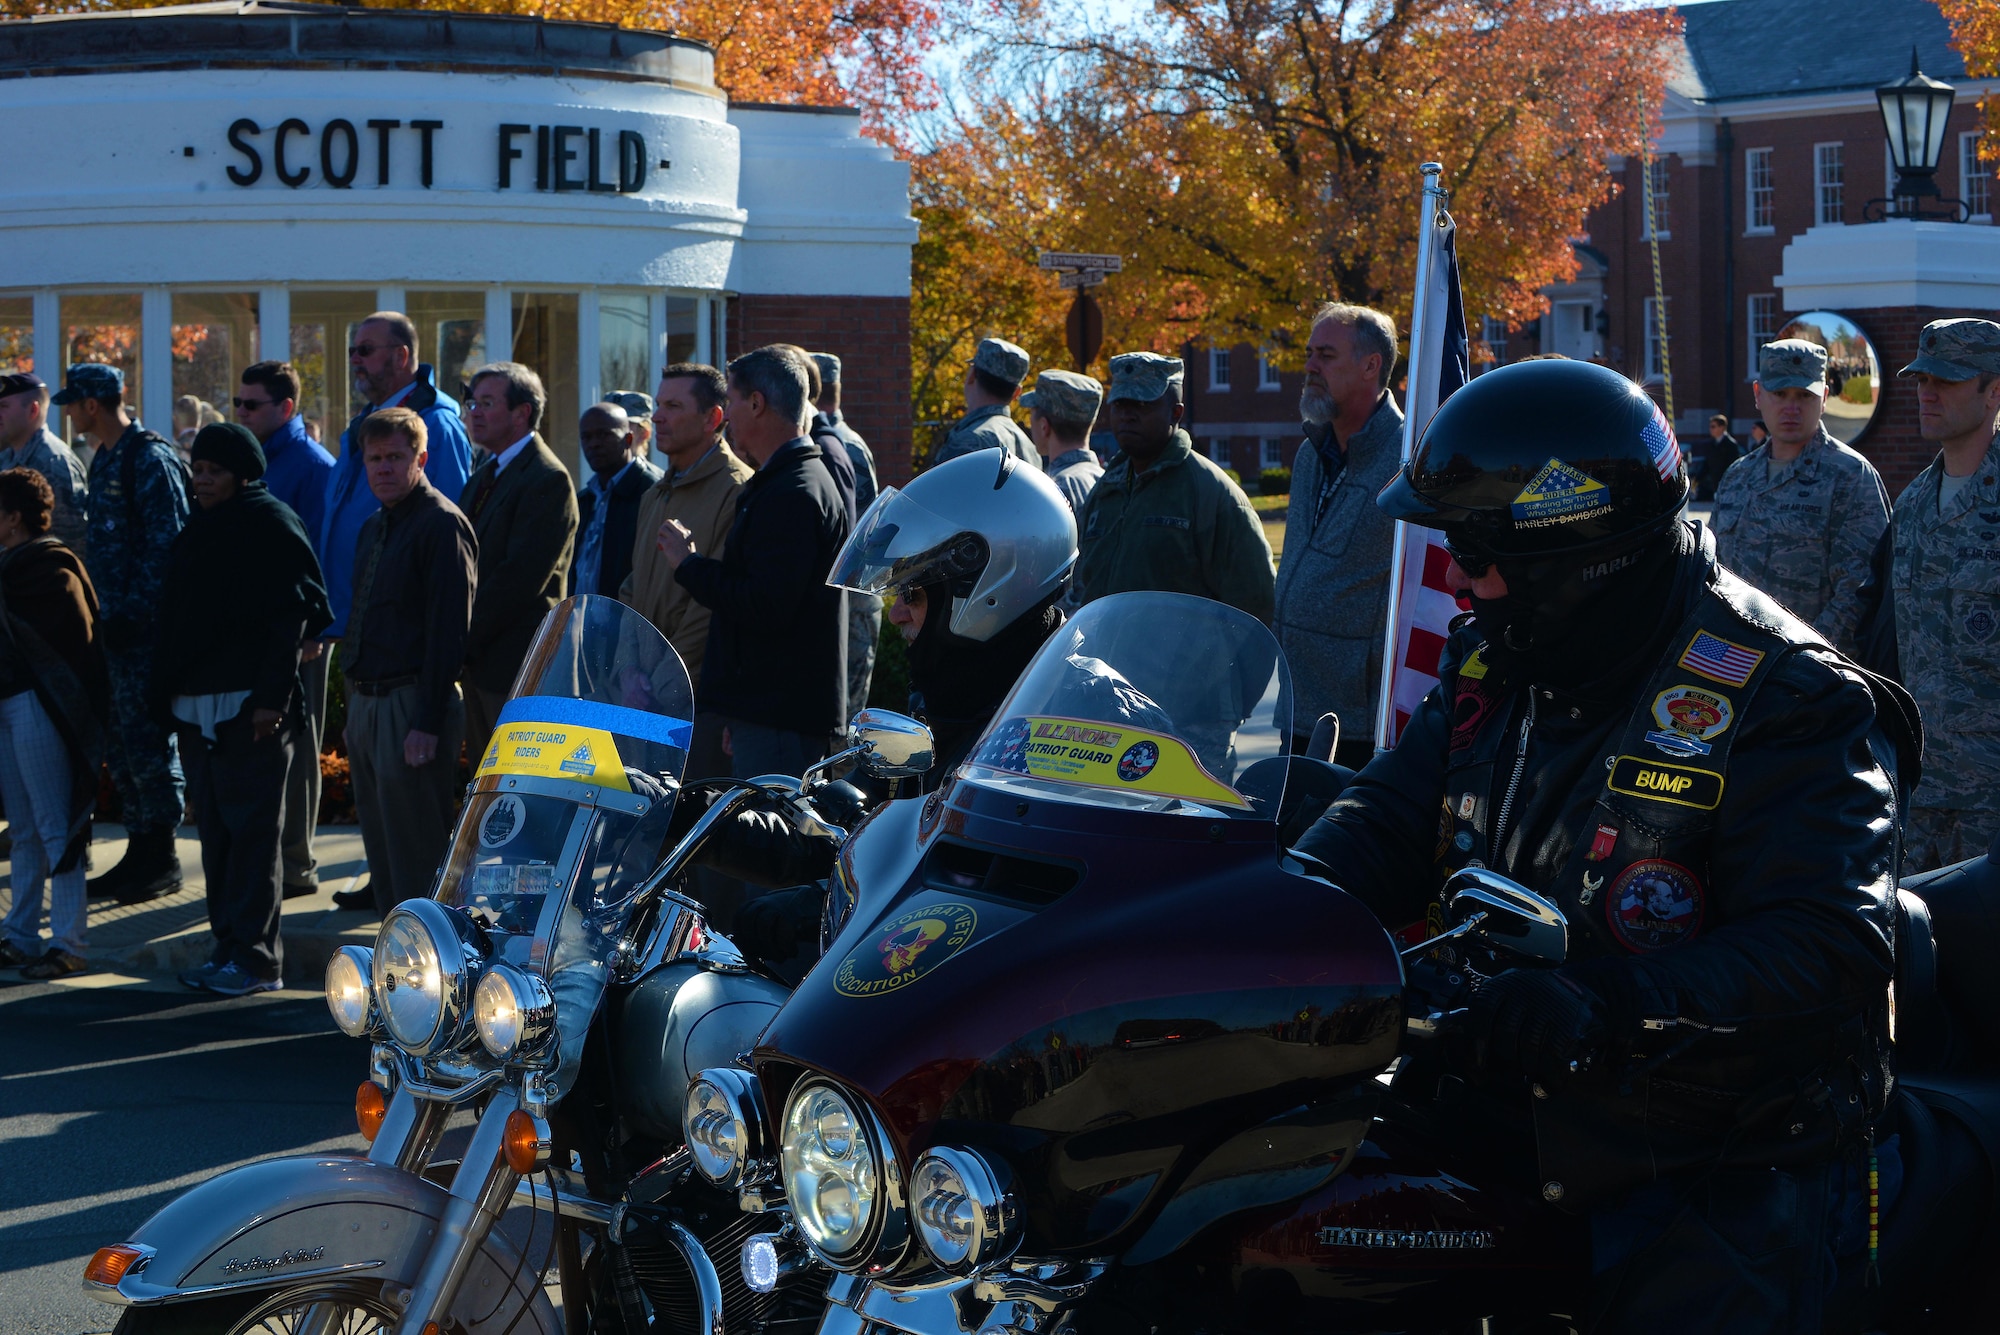 Patriot Guard riders prepare to escort the procession for Pfc. Tyler R. Iubelt, Scott Air Force Base, Illinois, Nov. 21, 2016. Iubelt died Nov. 12 as a result of injuries sustained from an improvised explosive device in Bagram, Afghanistan. His remains transited through Scott AFB with his family, where Scott personnel were able to pay their final respects to the 20-year-old native of Tamaroa, Illinois. He was assigned to Fort Hood, Texas. (U.S. Air Force photo by Senior Airman Erica Fowler)